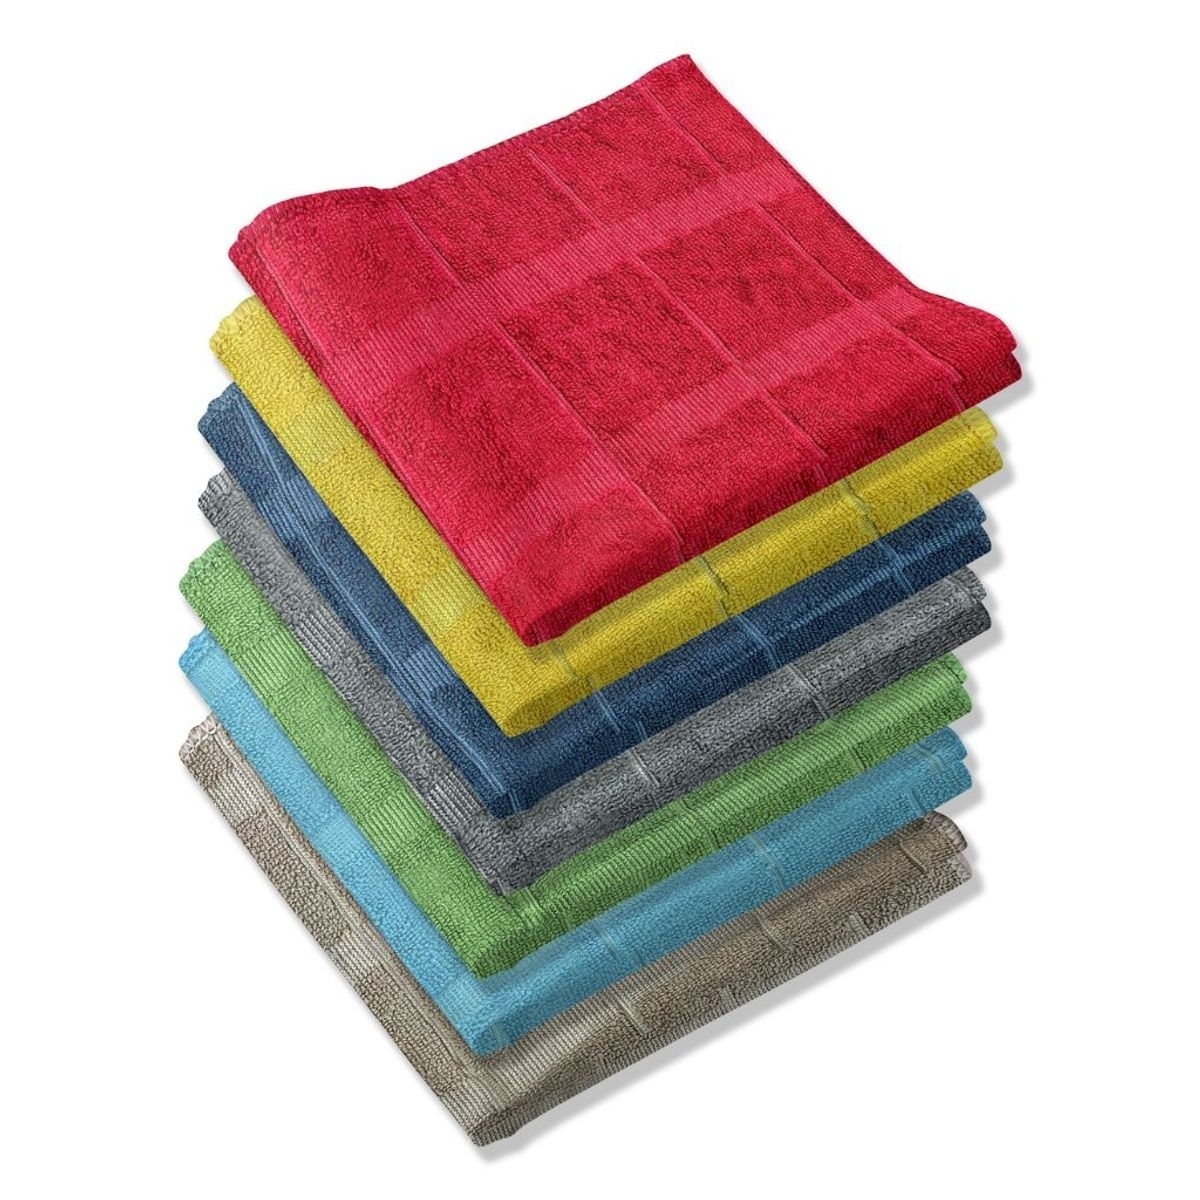 2-Pack: Ultra-Absorbent Multi Use Cleaning Super Soft Microfiber Dish Utility Rag Cloths - Red, Striped